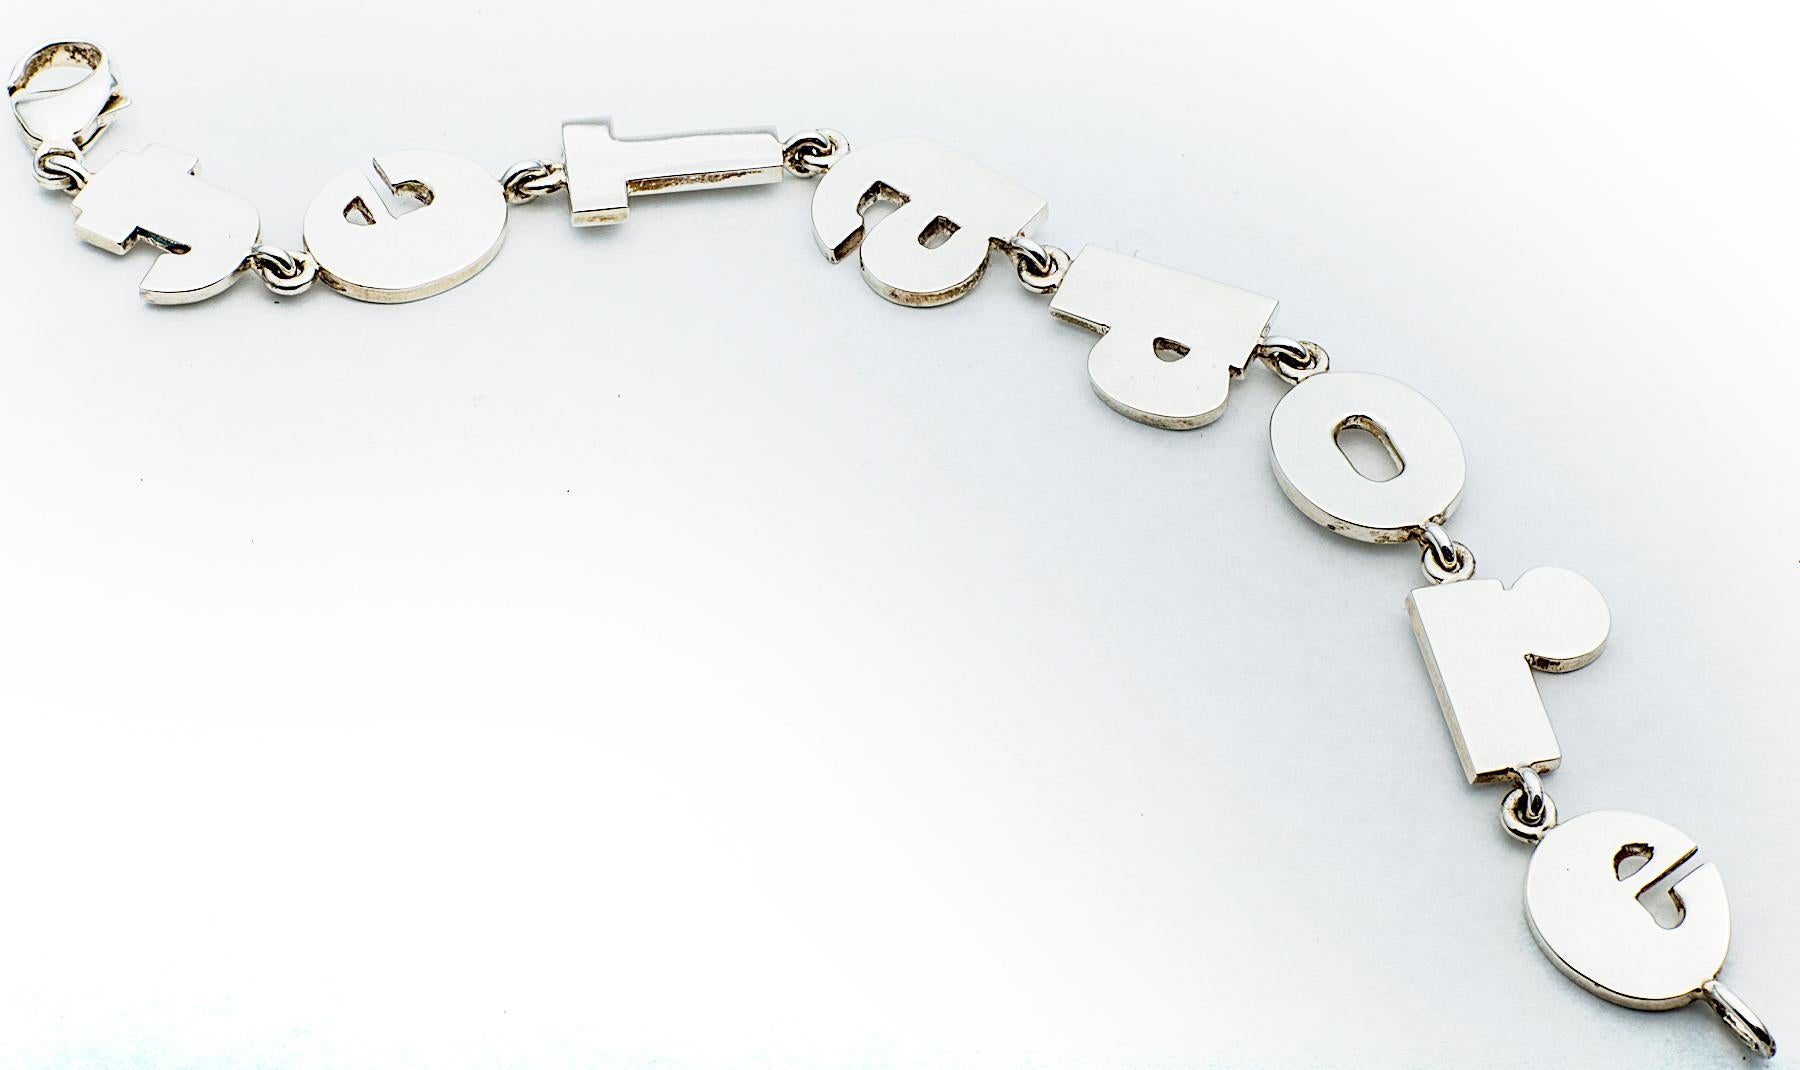 Saying Je T’Adore, translated from French to mean “I love you”, is sometimes just enough, and this sterling silver bracelet does just that. 7.25